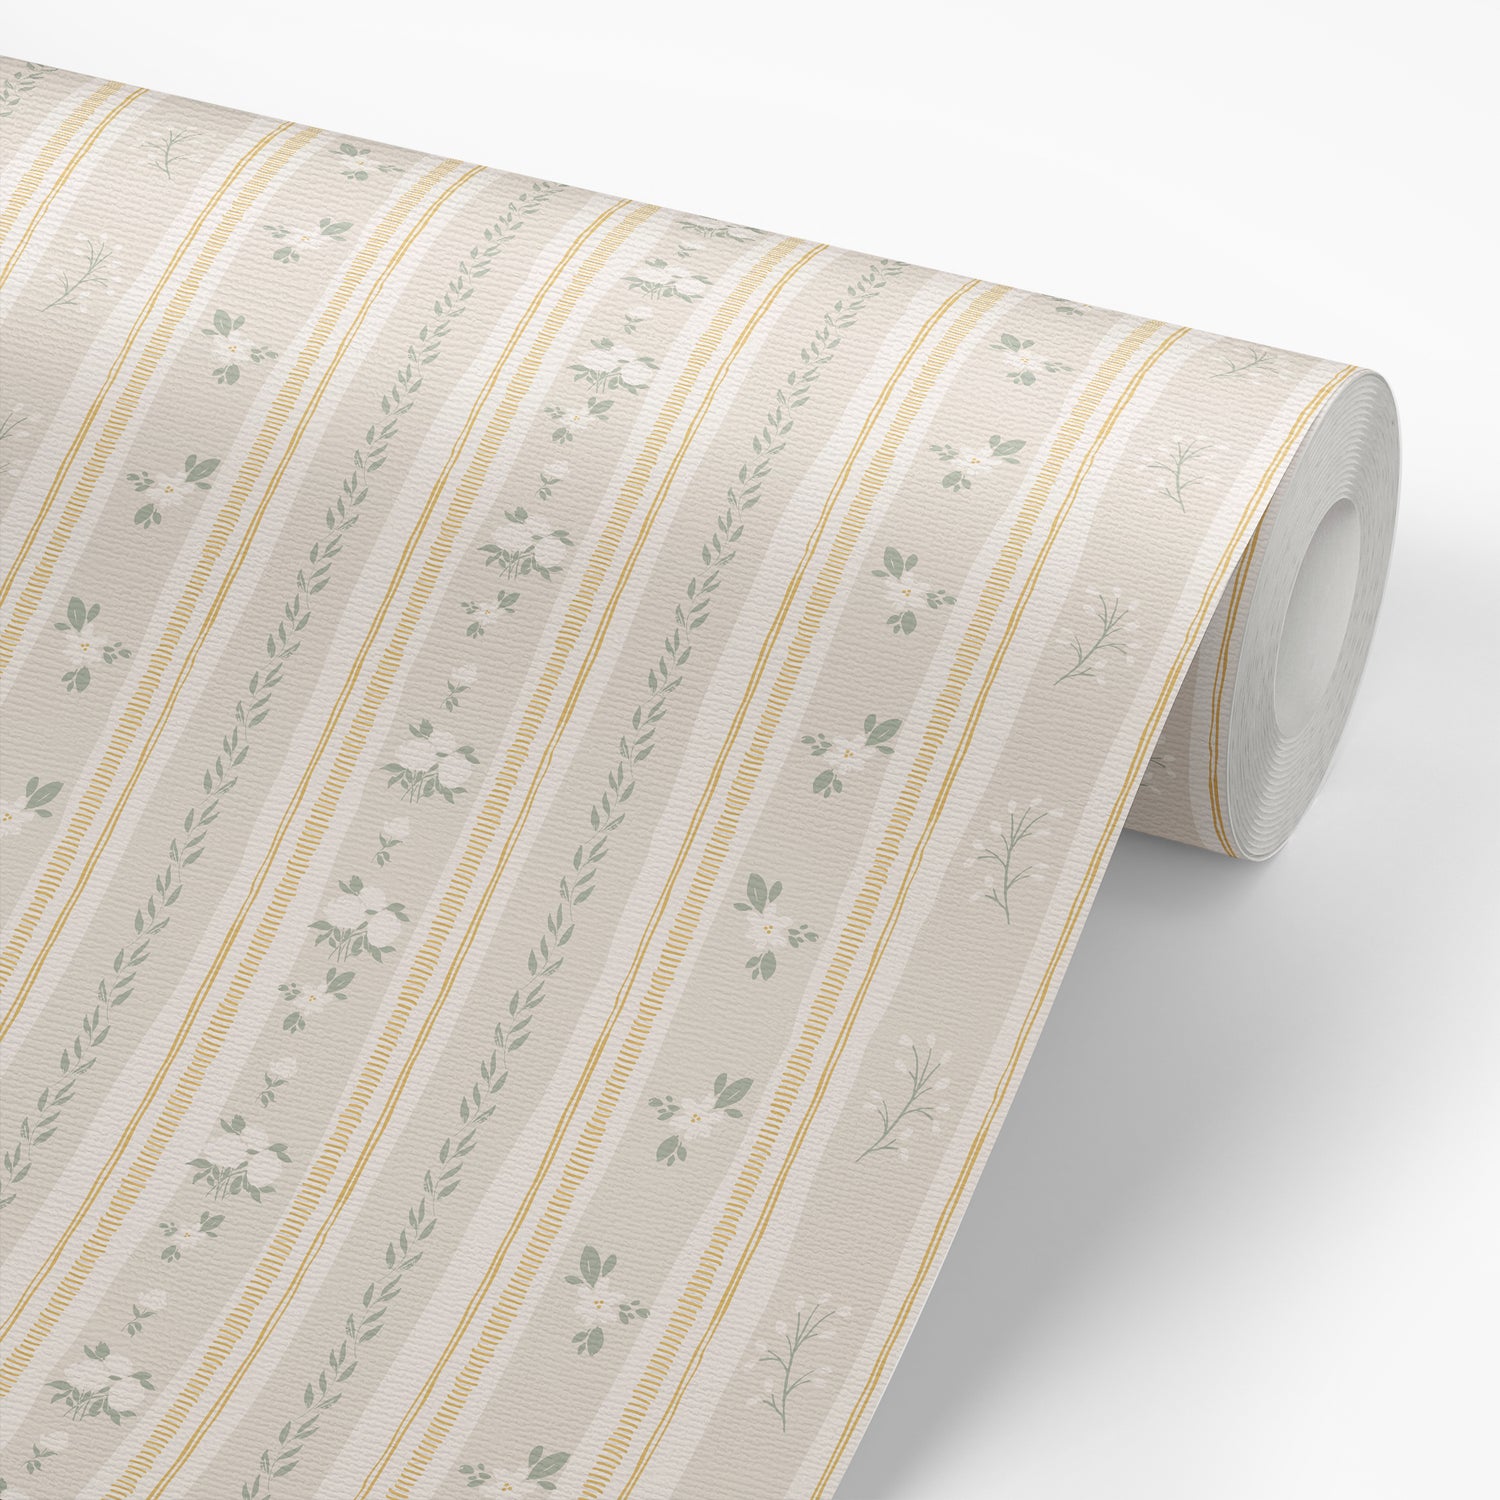 Wallpaper Roll featuring Orchard Stripes Peel and Stick, Removable Wallpaper in Nude